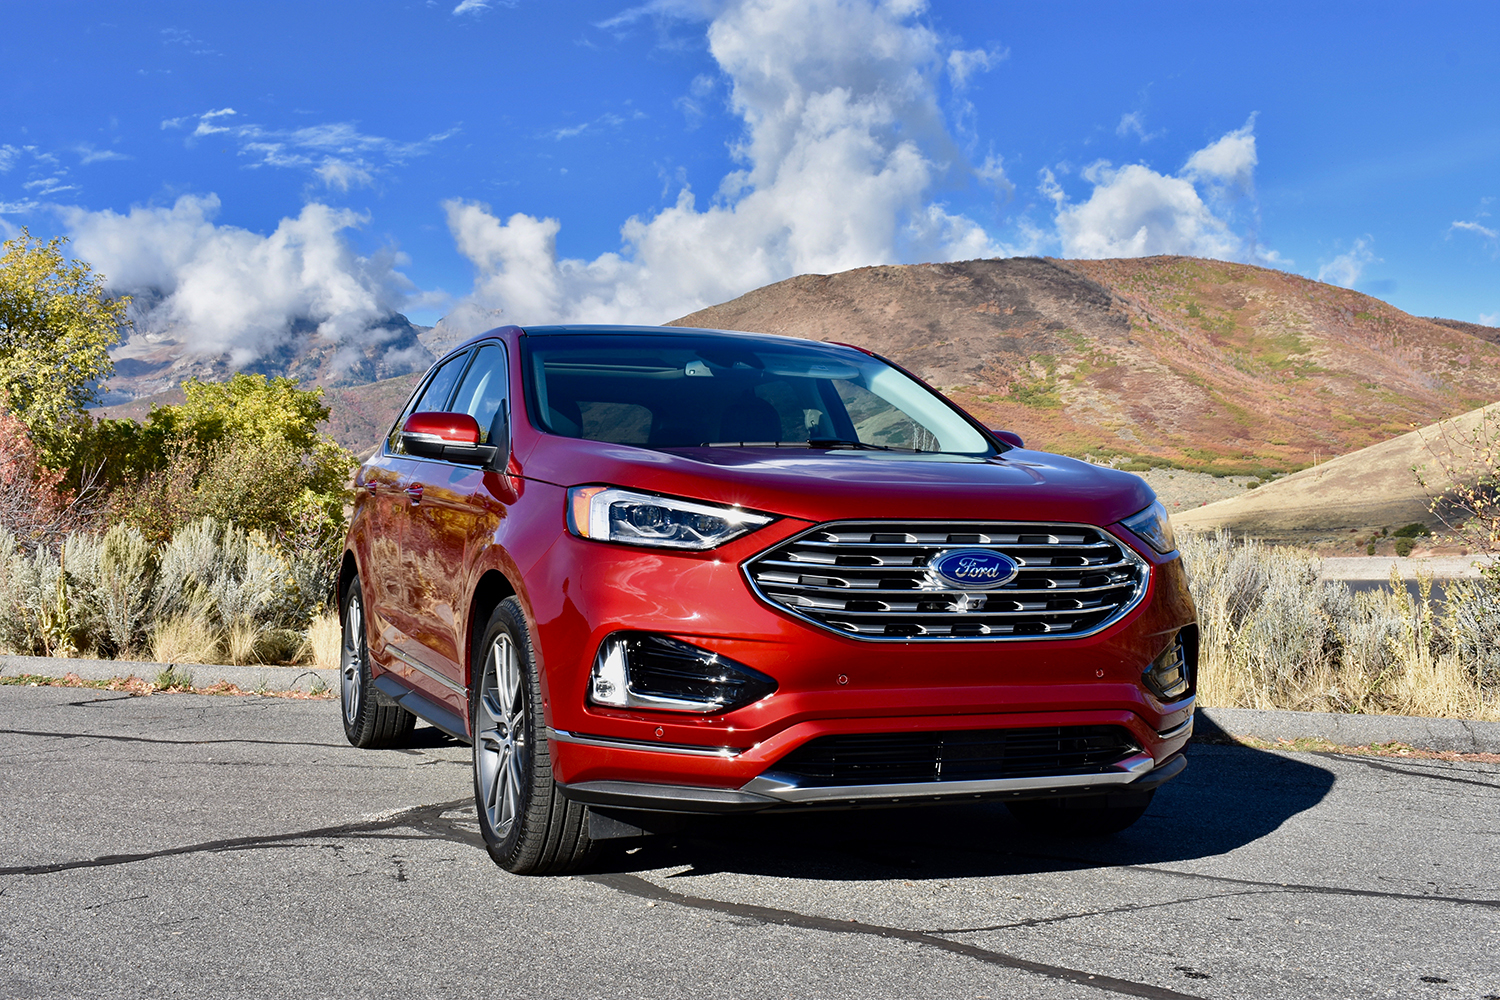 New Ford Edge SUV Uses Artificial Intelligence to Help Improve